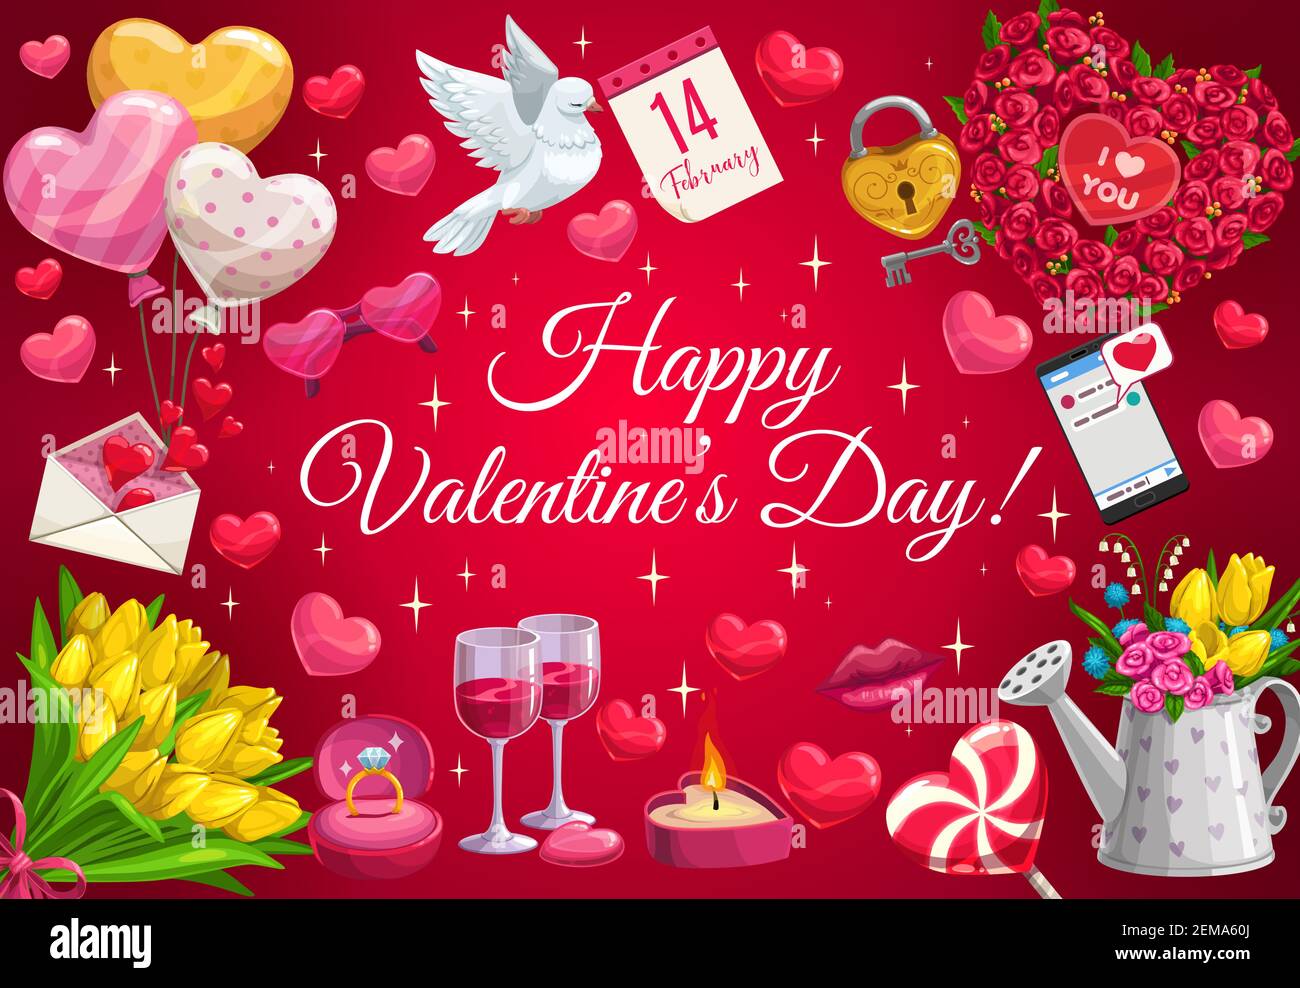 https://c8.alamy.com/comp/2EMA60J/happy-valentines-day-greeting-with-sparkling-stars-and-golden-heart-balloons-vector-valentine-love-kiss-lips-love-message-in-phone-and-wedding-rings-2EMA60J.jpg